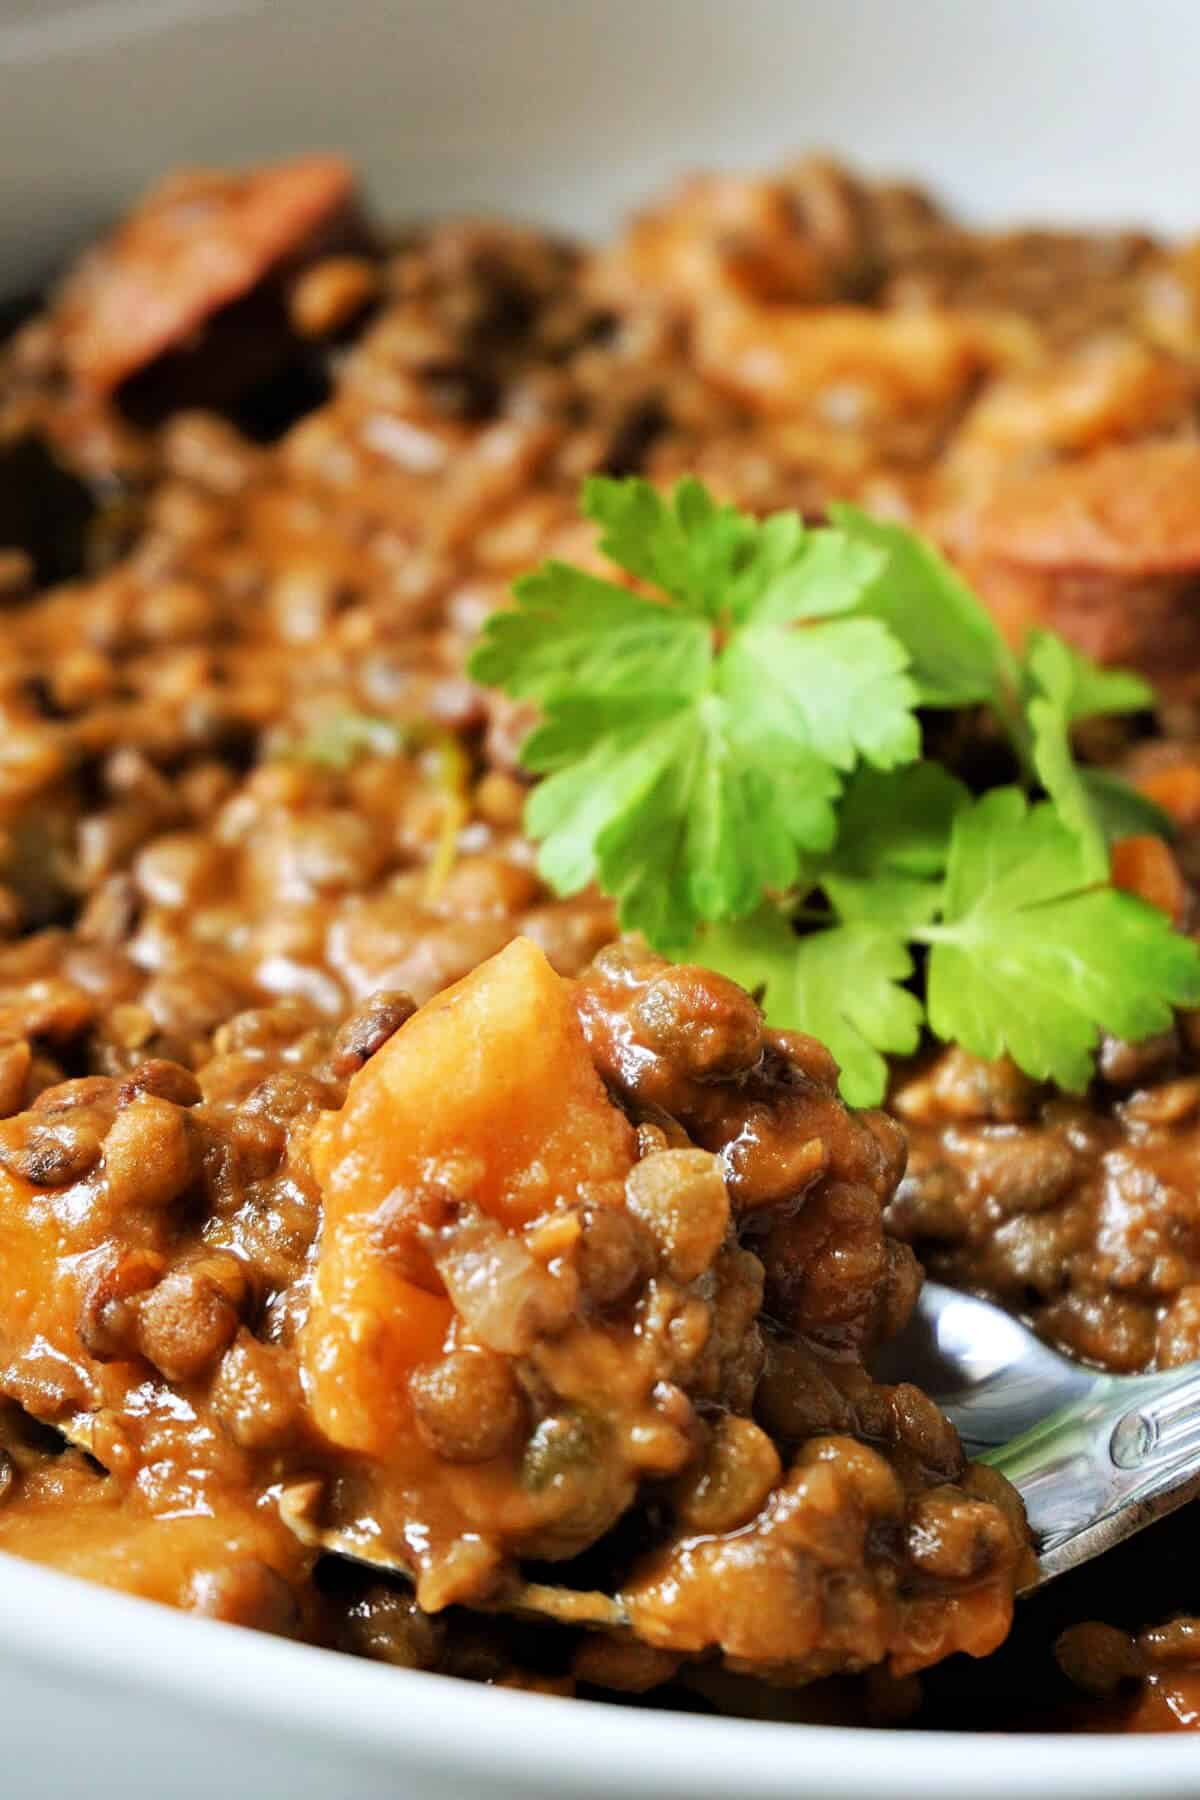 Close-up shoot of a dish with lentil stew.